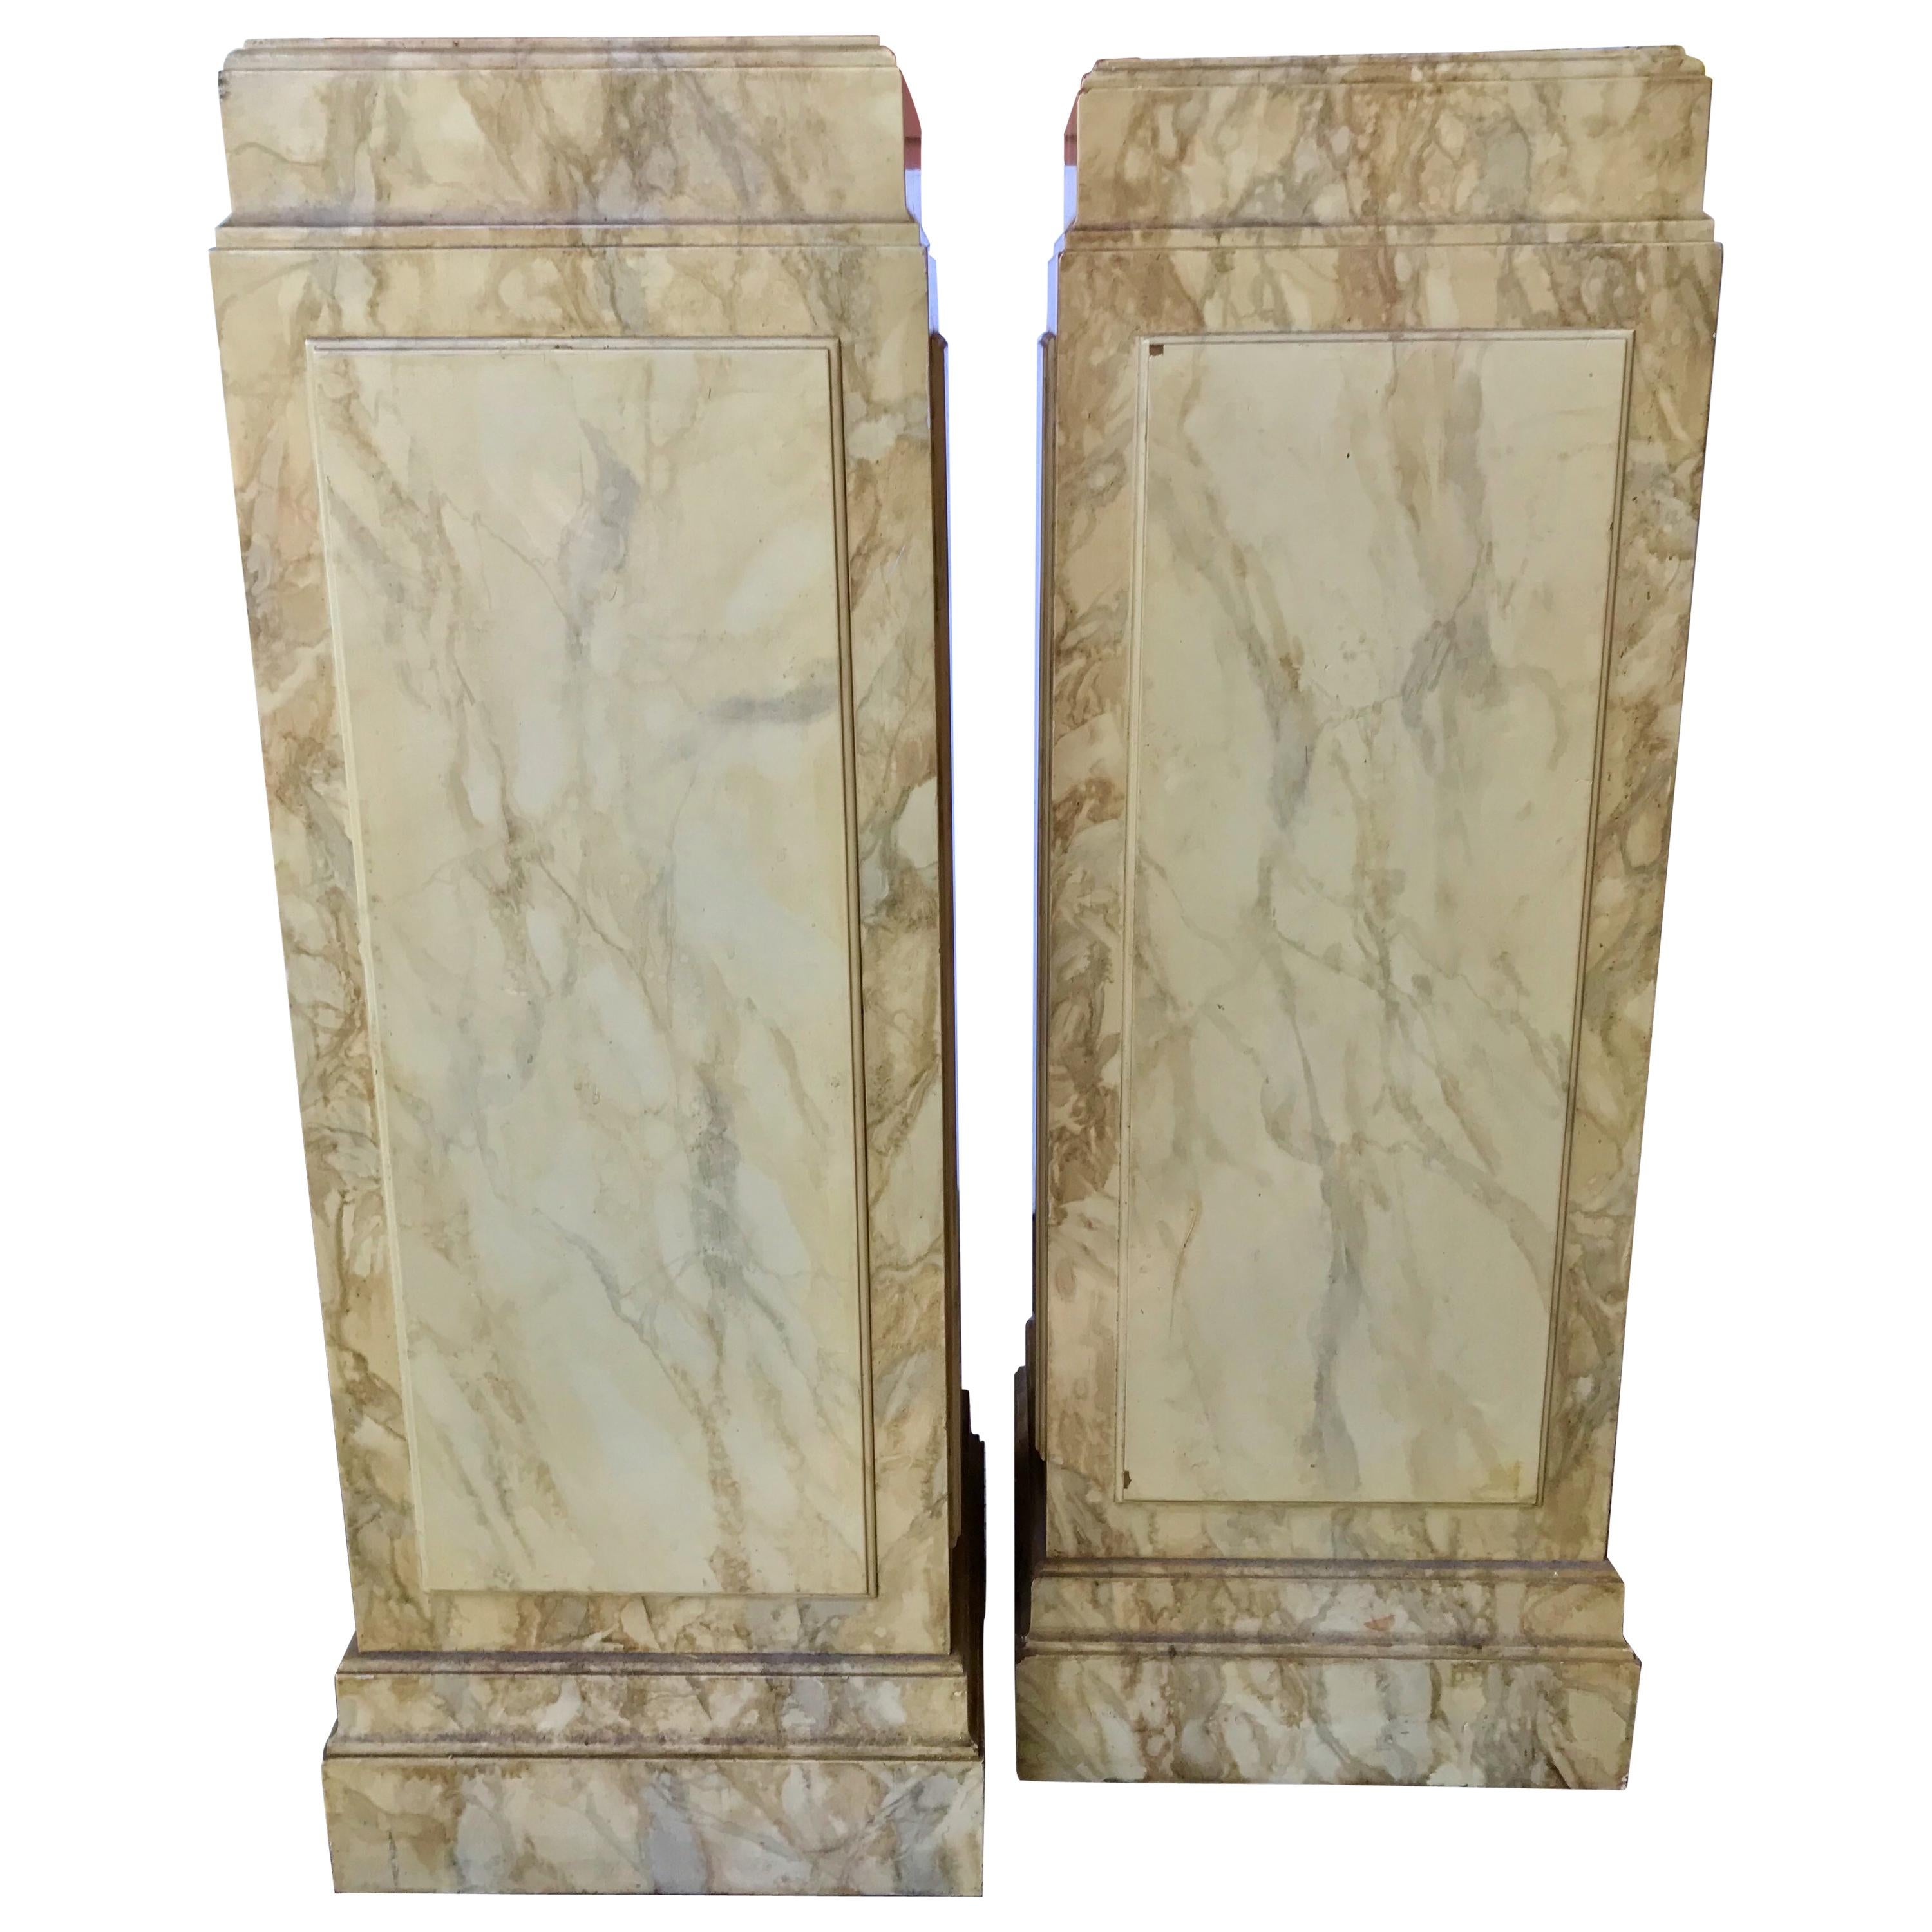 Pair of Faux Marble Painted or Finished Sculpture Pedestals